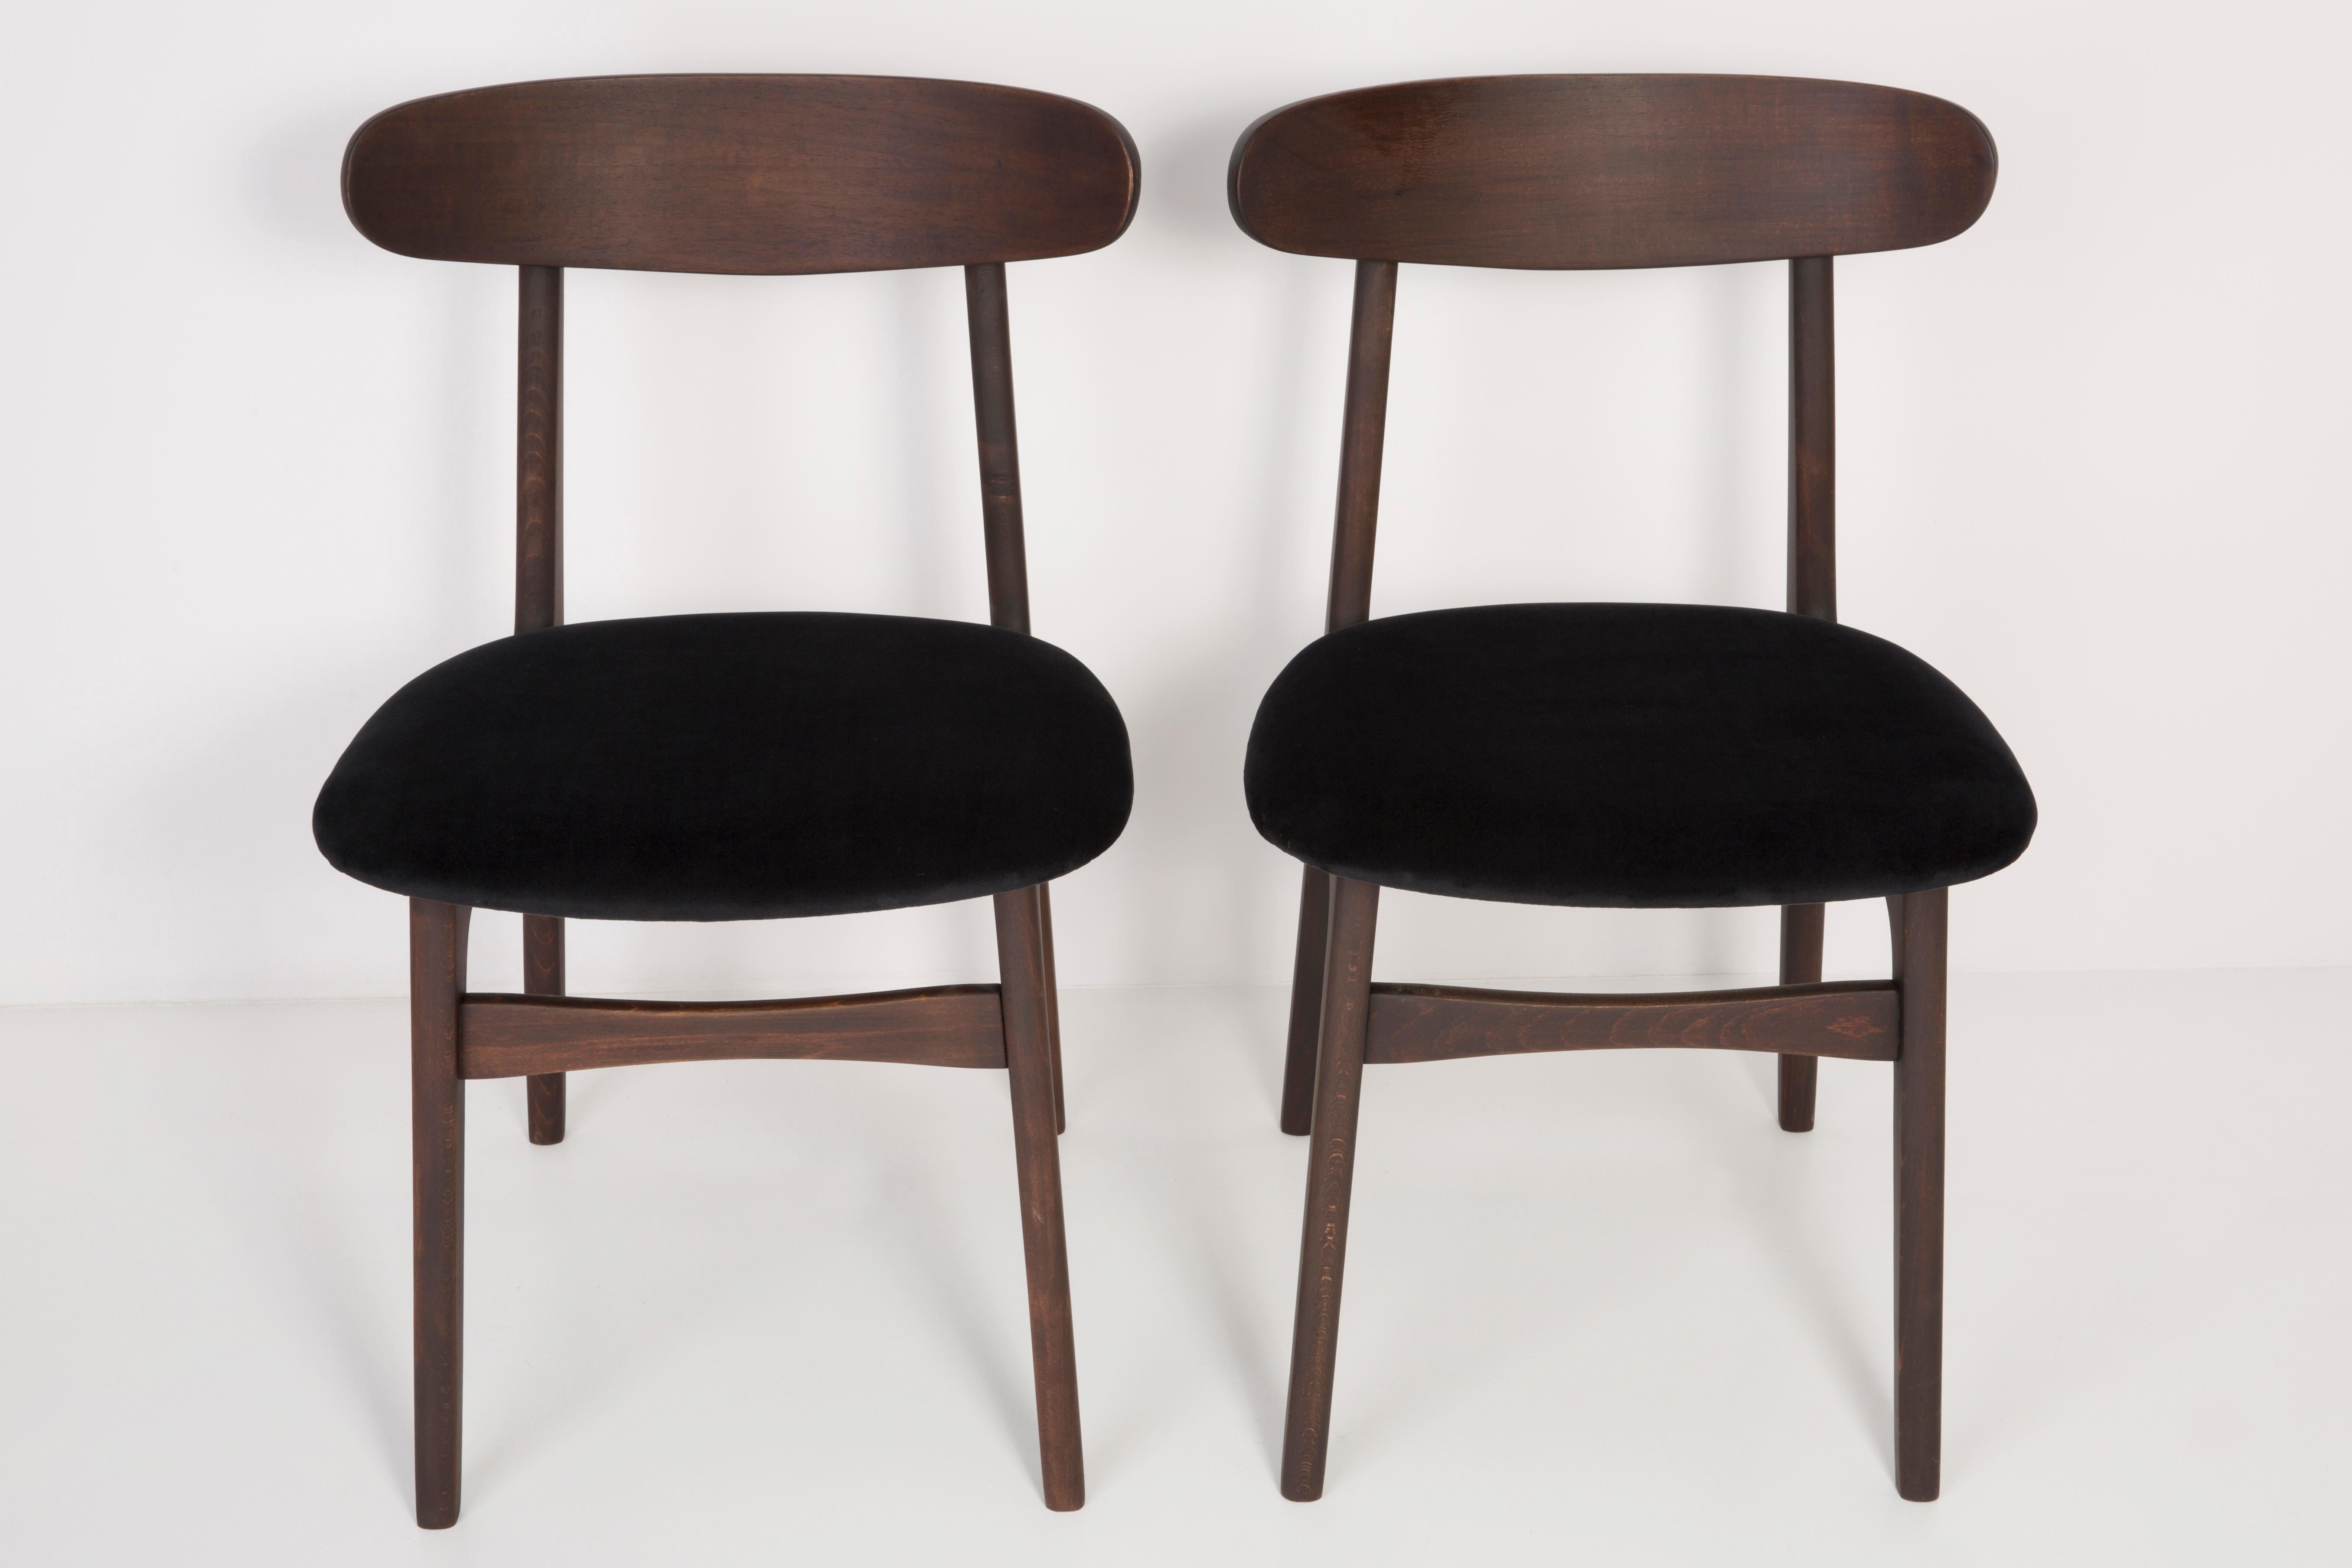 Chairs designed by Prof. Rajmund Halas. Made of beechwood. Chair is after a complete upholstery renovation, the woodwork has been refreshed. Seat and back is dressed in black, durable and pleasant to the touch velvet fabric. Chair is stabile and